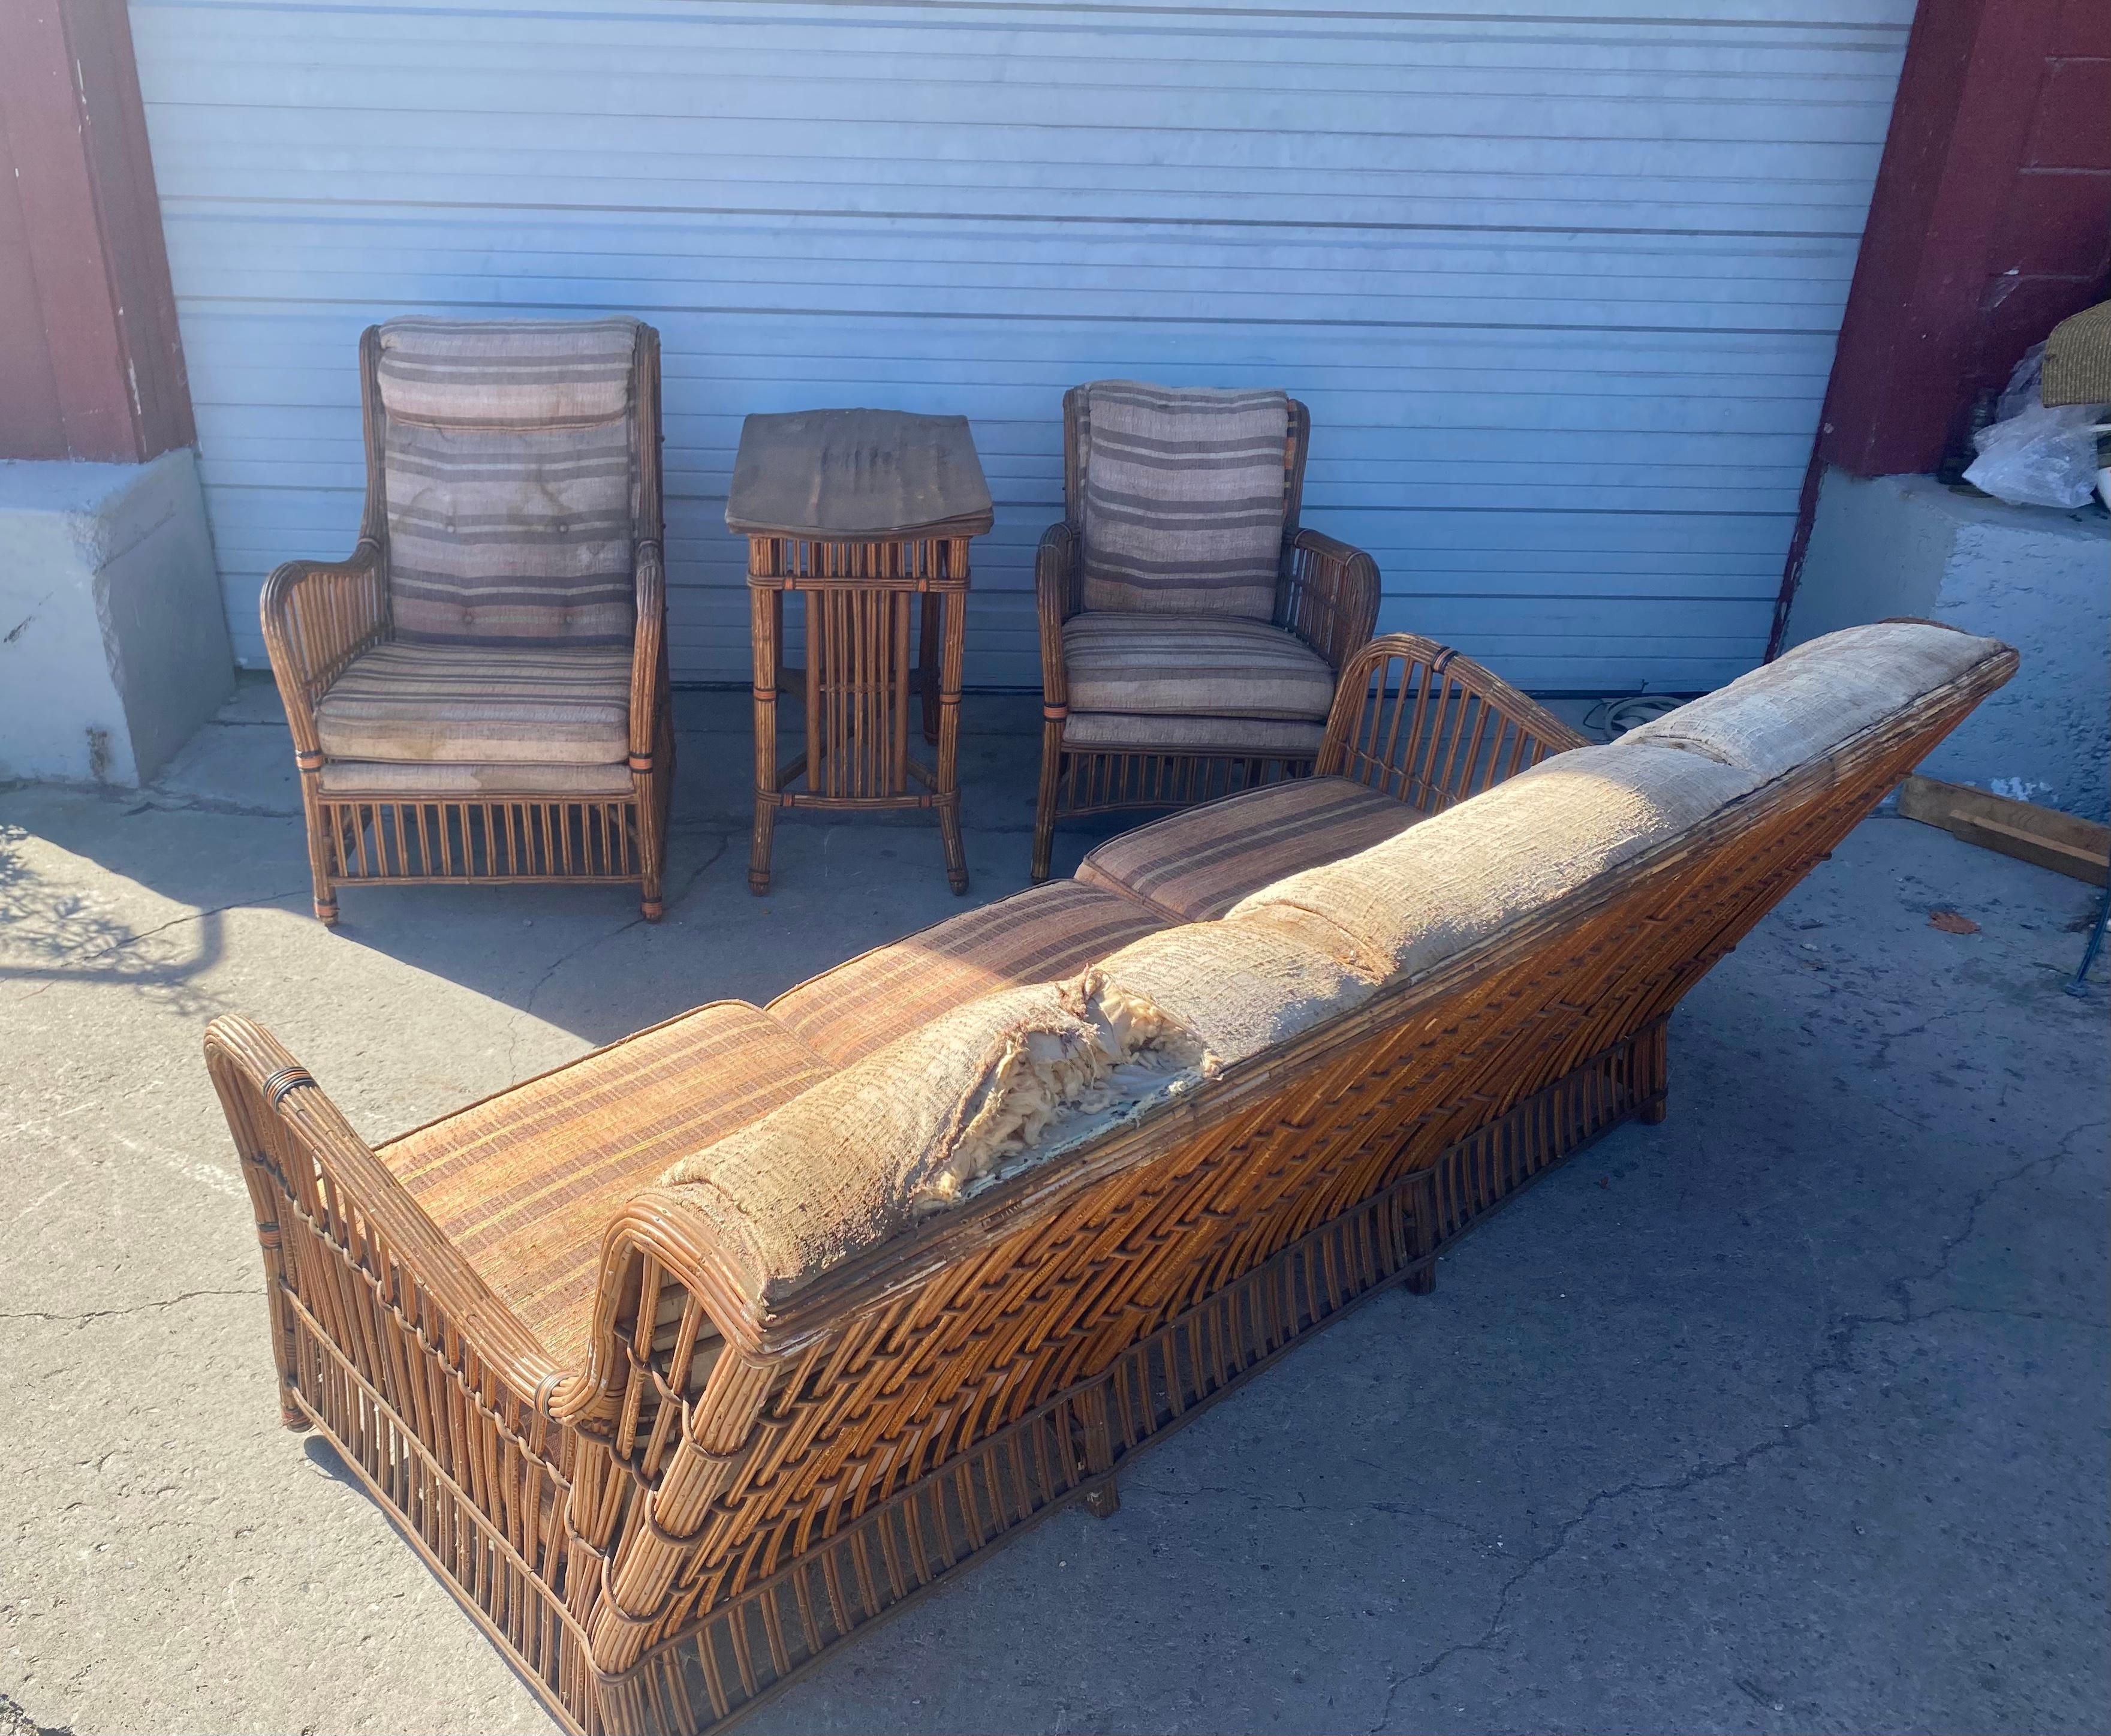 Art DECO split reed / stick wicker 4 piece seating, and table, Unusual design. Set consisting of his and hers lounge chairs, sofa and lamp table. Orininal condition, missing some orange rap, (bottom legs). Retains original upholstery. Very unusual